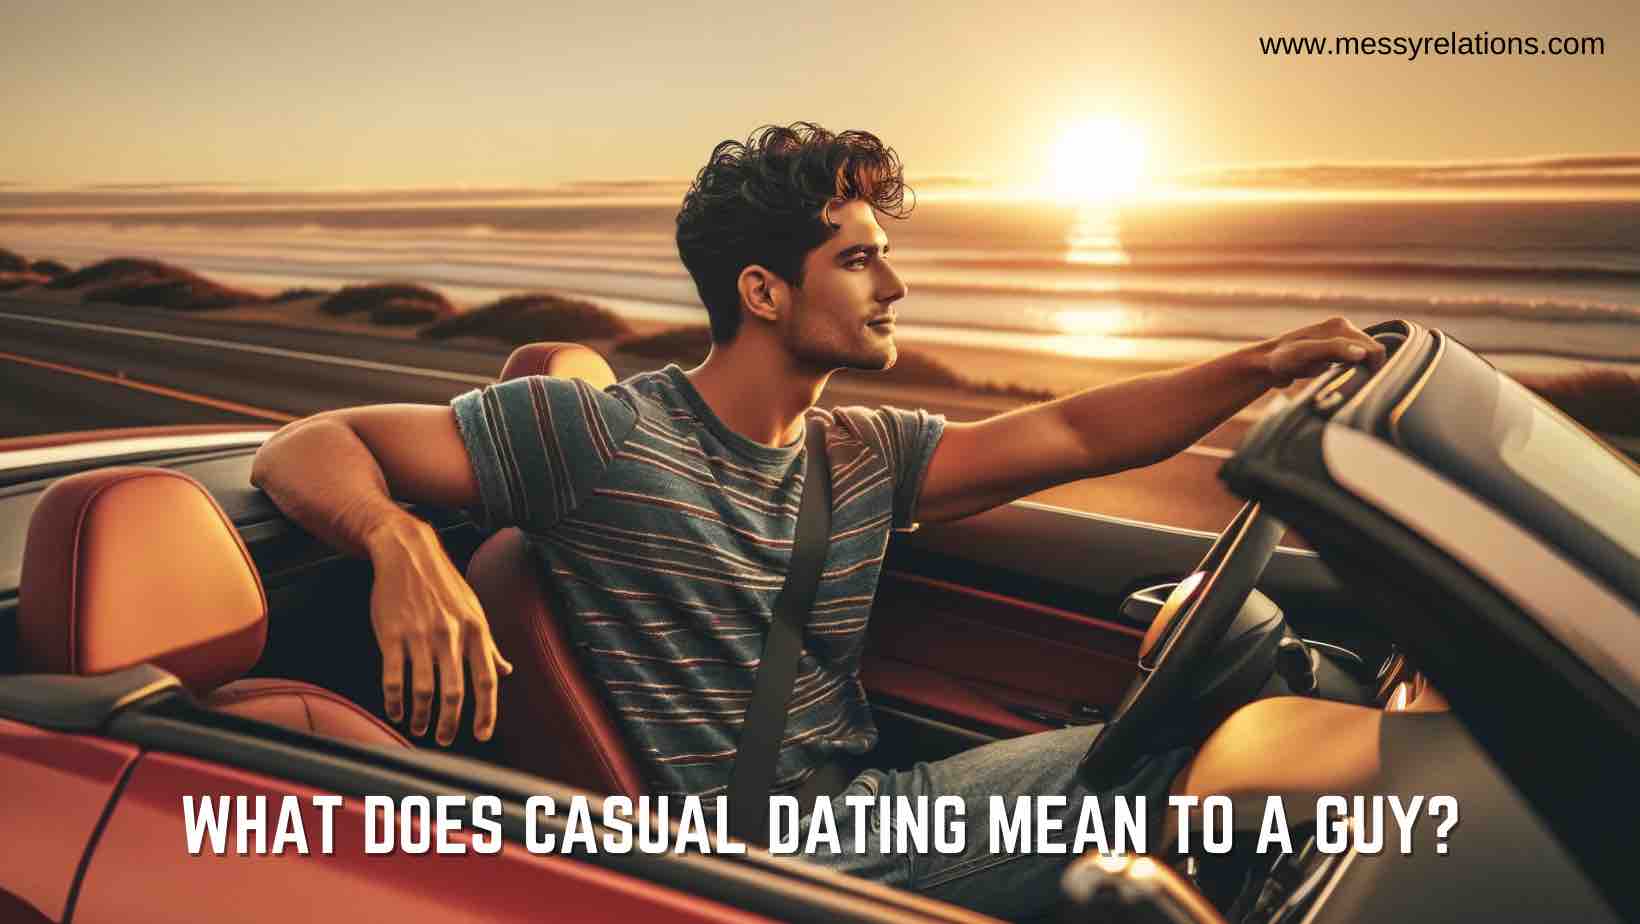 What Does Casual Dating Mean To A Guy?